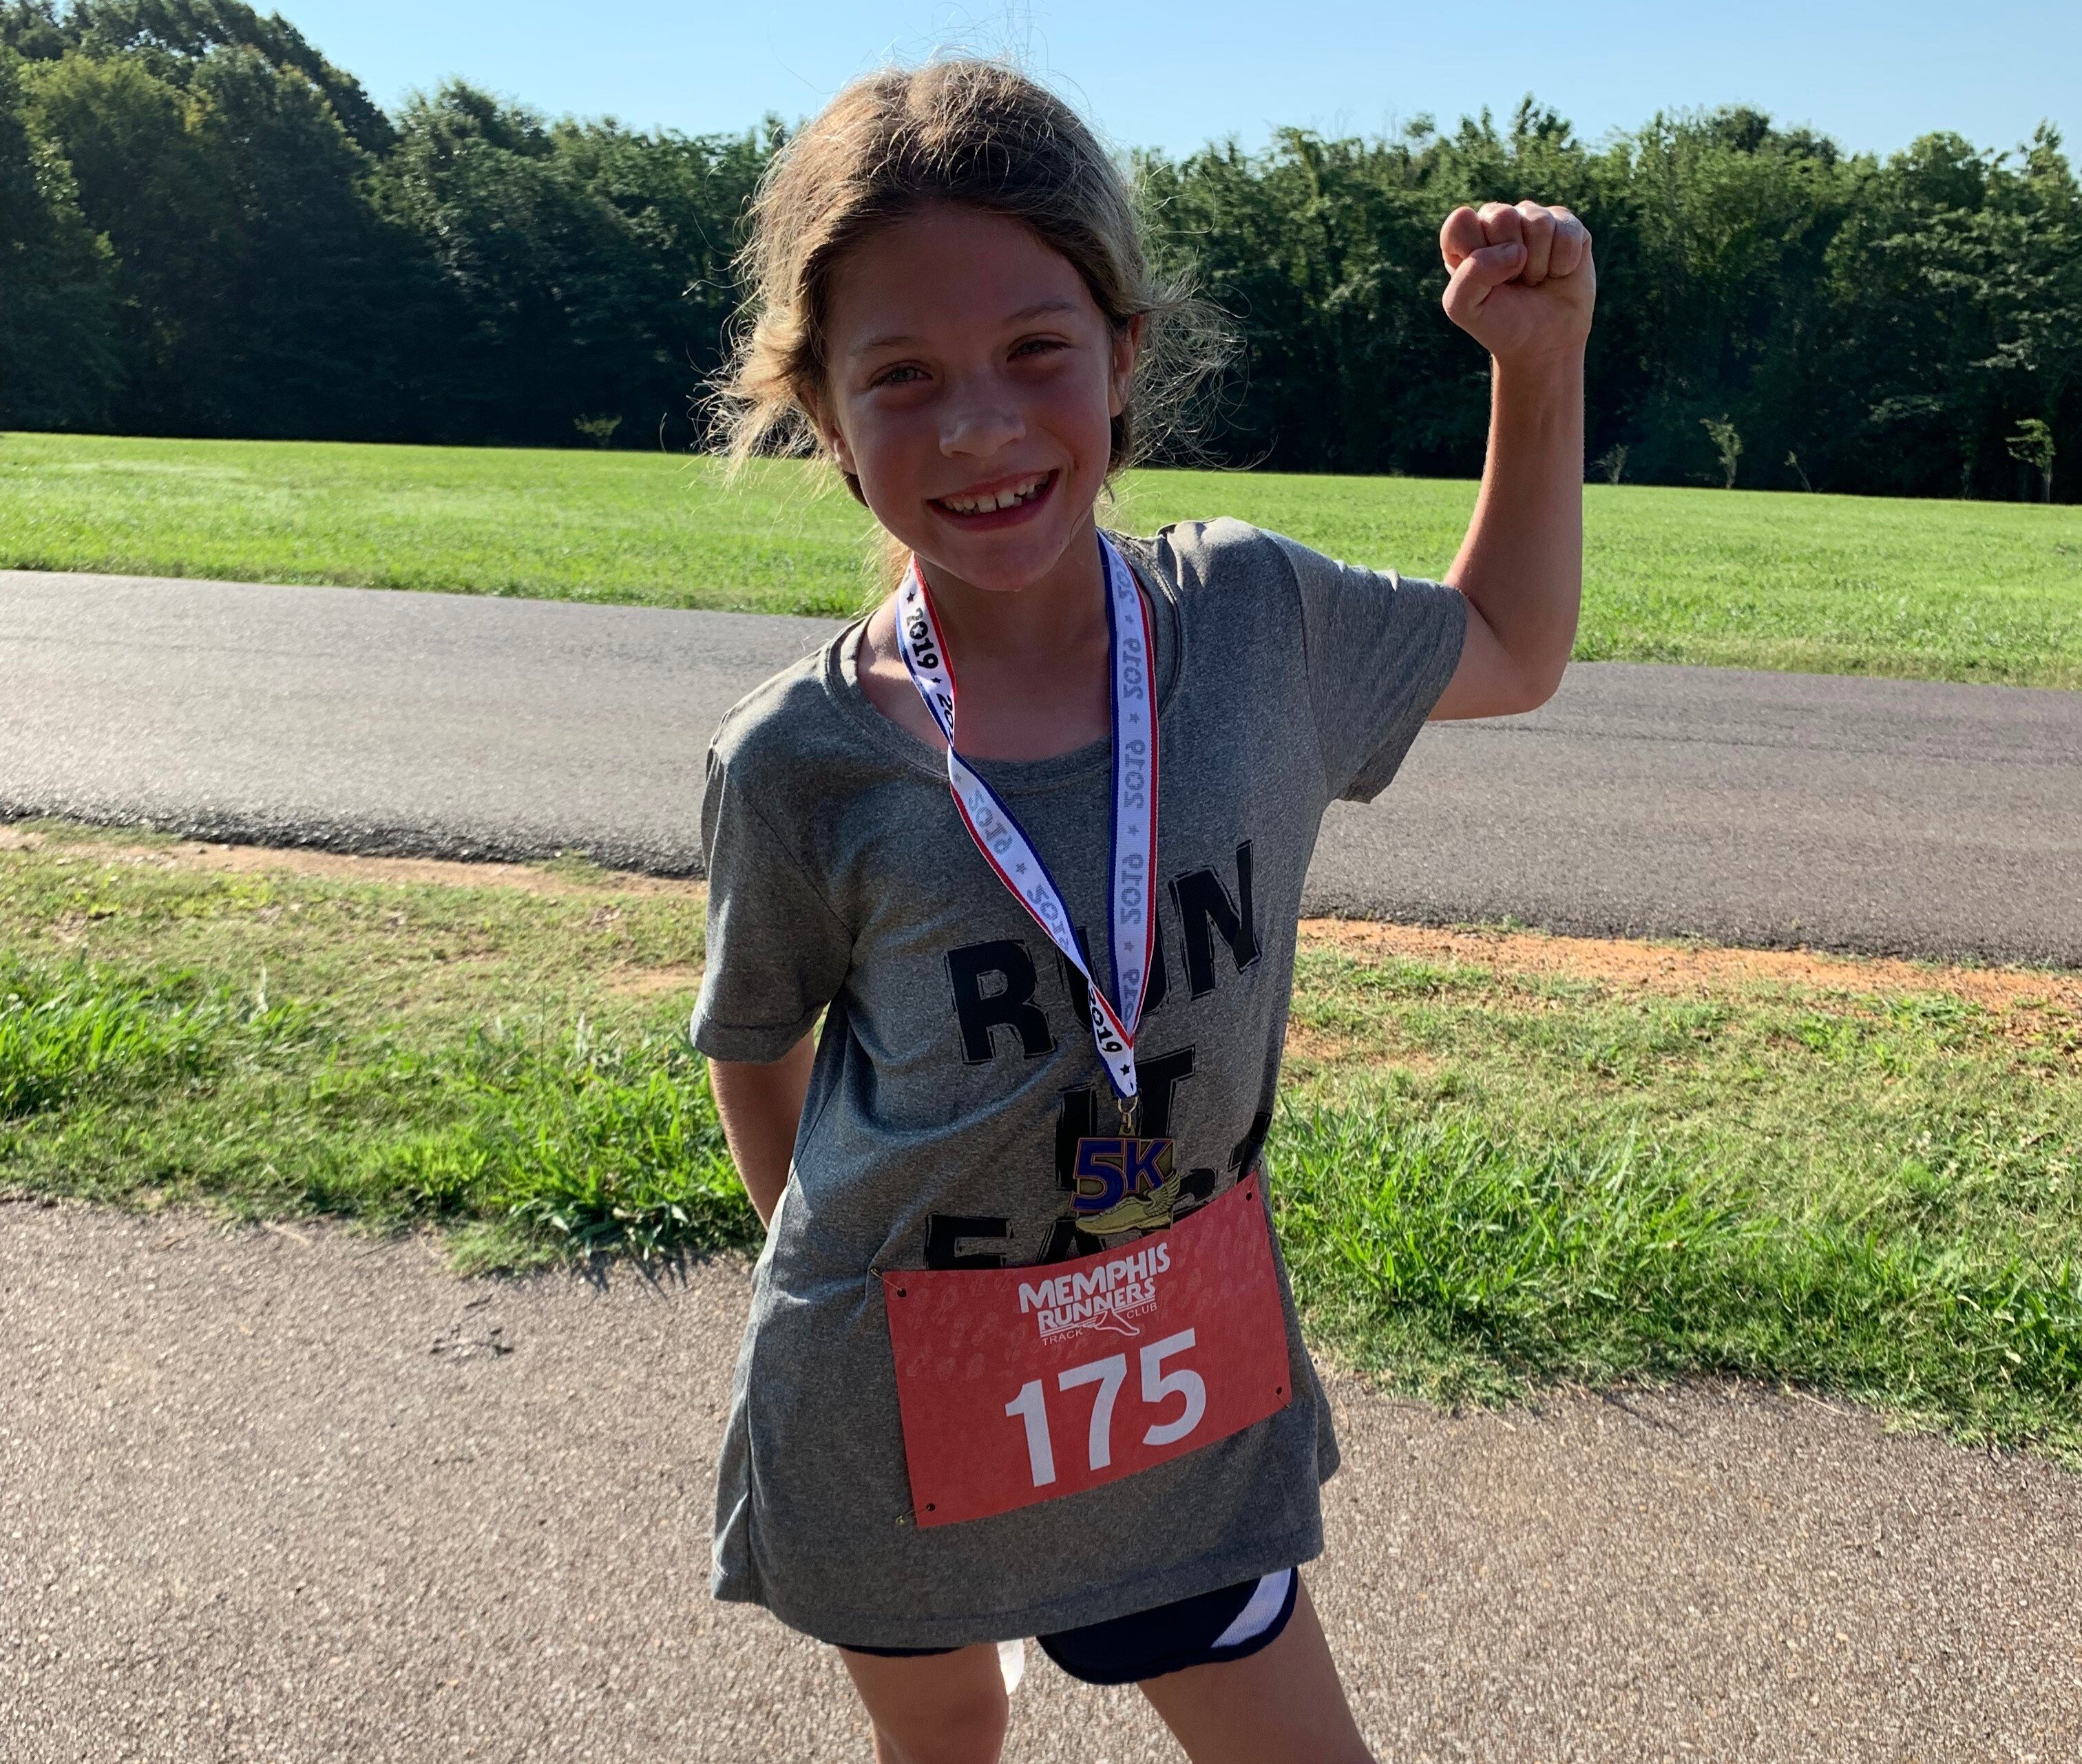 Juleann Roberts flexes her muscles after taking first in the youth division of The Hagar Center 5K Fun Run. (Ashlei Williams)